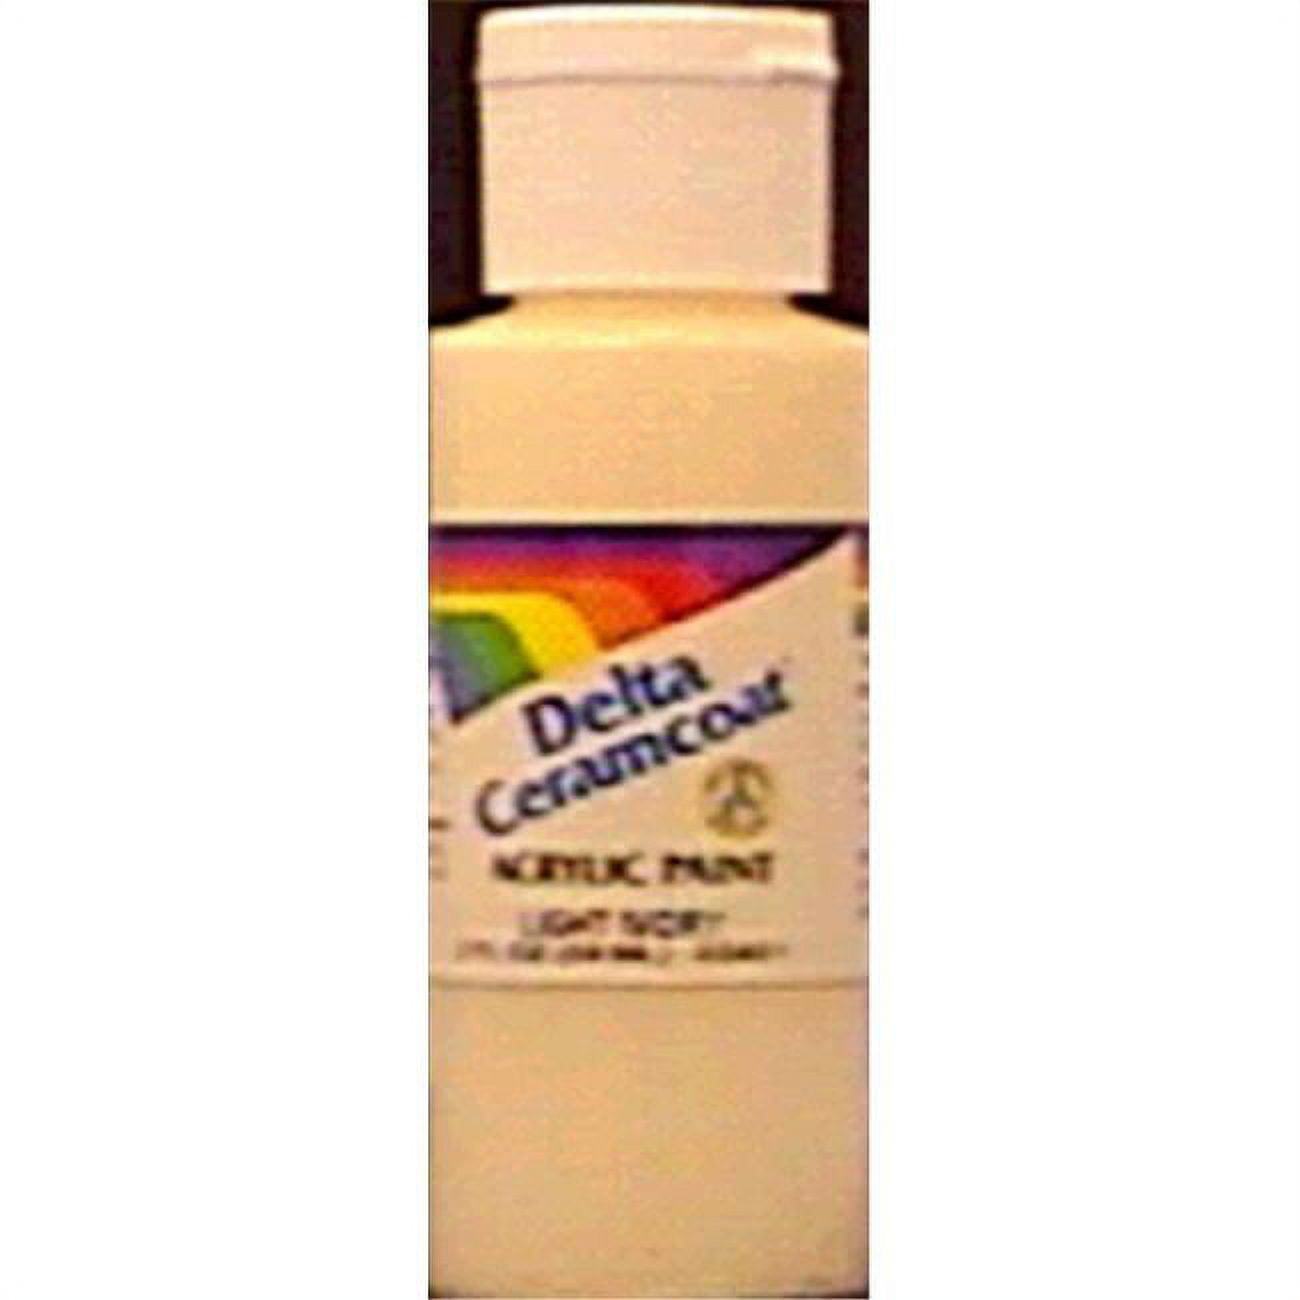 Ce02069~2098 Plaid:delta Ceramcoat Acrylic Paint, 2-ounce, Creamy Smooth  Consistency For One Coat Coverage, Art Supplies - Water Color - AliExpress